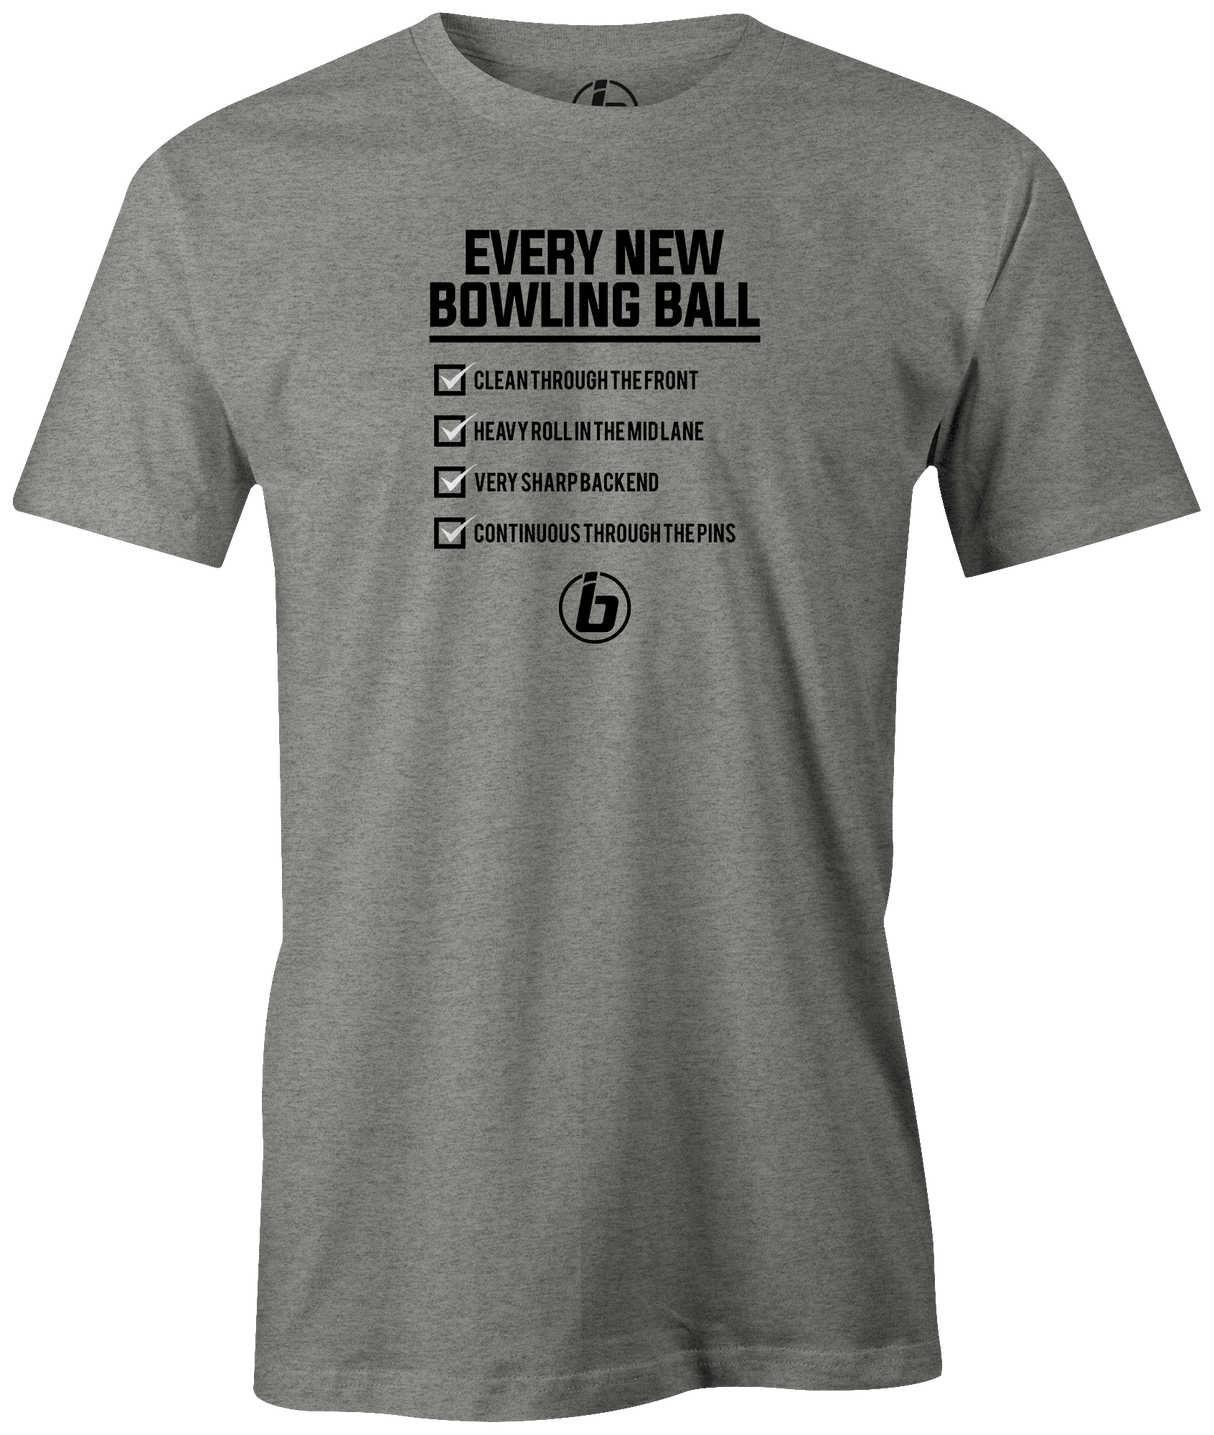 Qualities of every new bowling ball release...facts! This is the perfect gift for any long time or avid bowler. Grab this tee and hit the lanes! cool, funny, tshirt, tee, tee shirt, tee-shirt, league bowling, team bowling, ebonite, hammer, track, columbia 300, storm, roto grip, brunswick, radical, dv8, motiv.